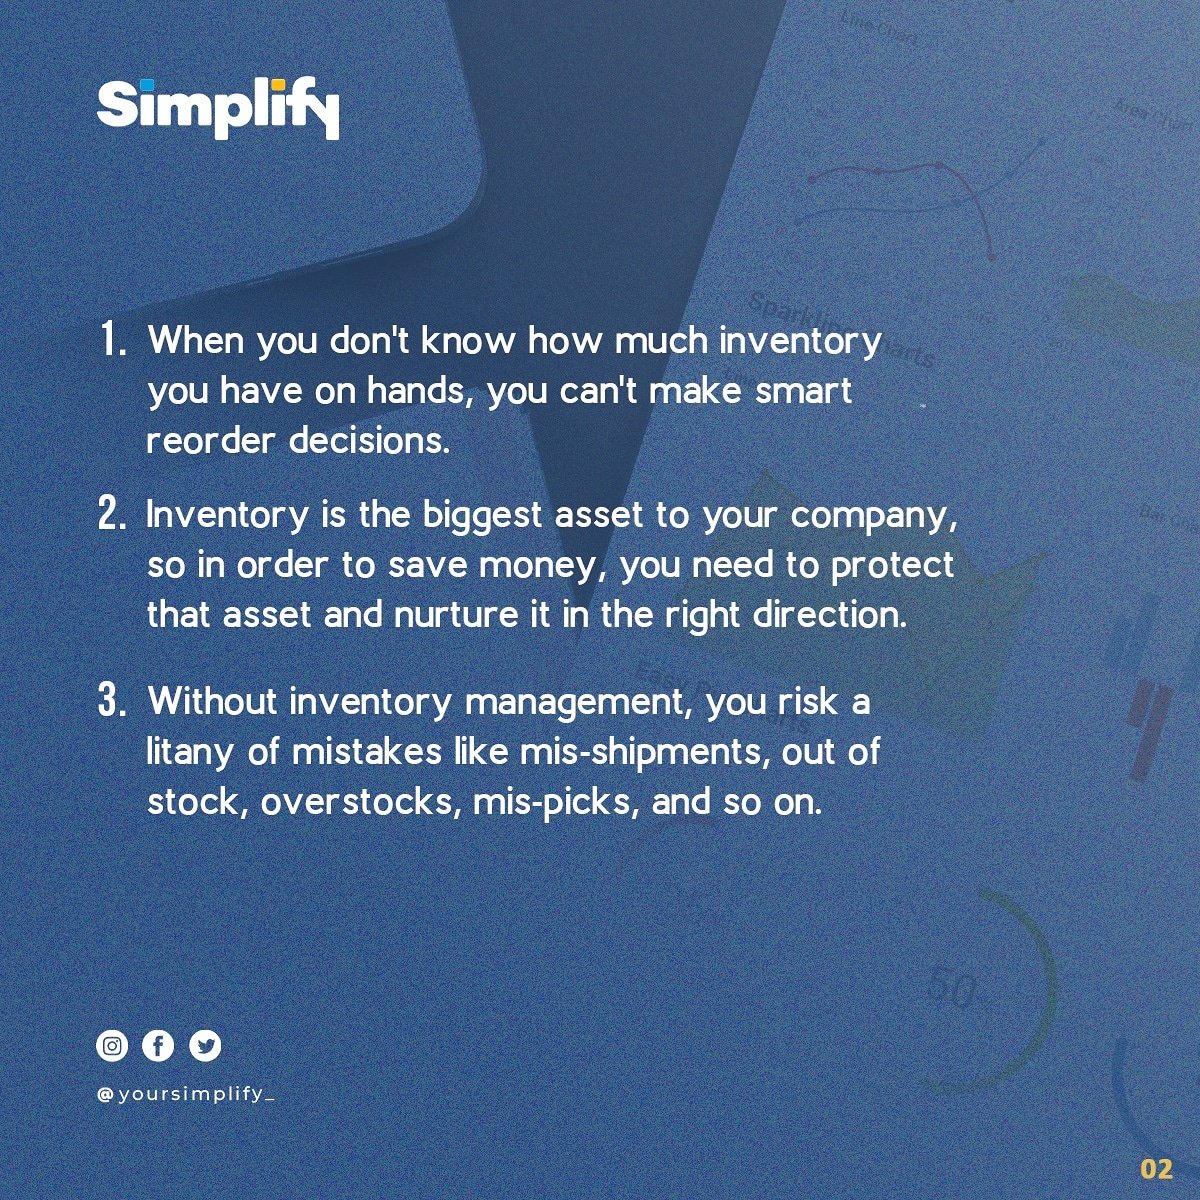 3 Things You Need to Know About Inventory Management
 From us @yoursimplify

#inventorymanagement #pos #software #businesssolution #businessmanagement #simplifyyourbusiness #salesmanagement #erp #receipting #customermanagement #ecommerce #multipleusers #invoicing #stockmanagement